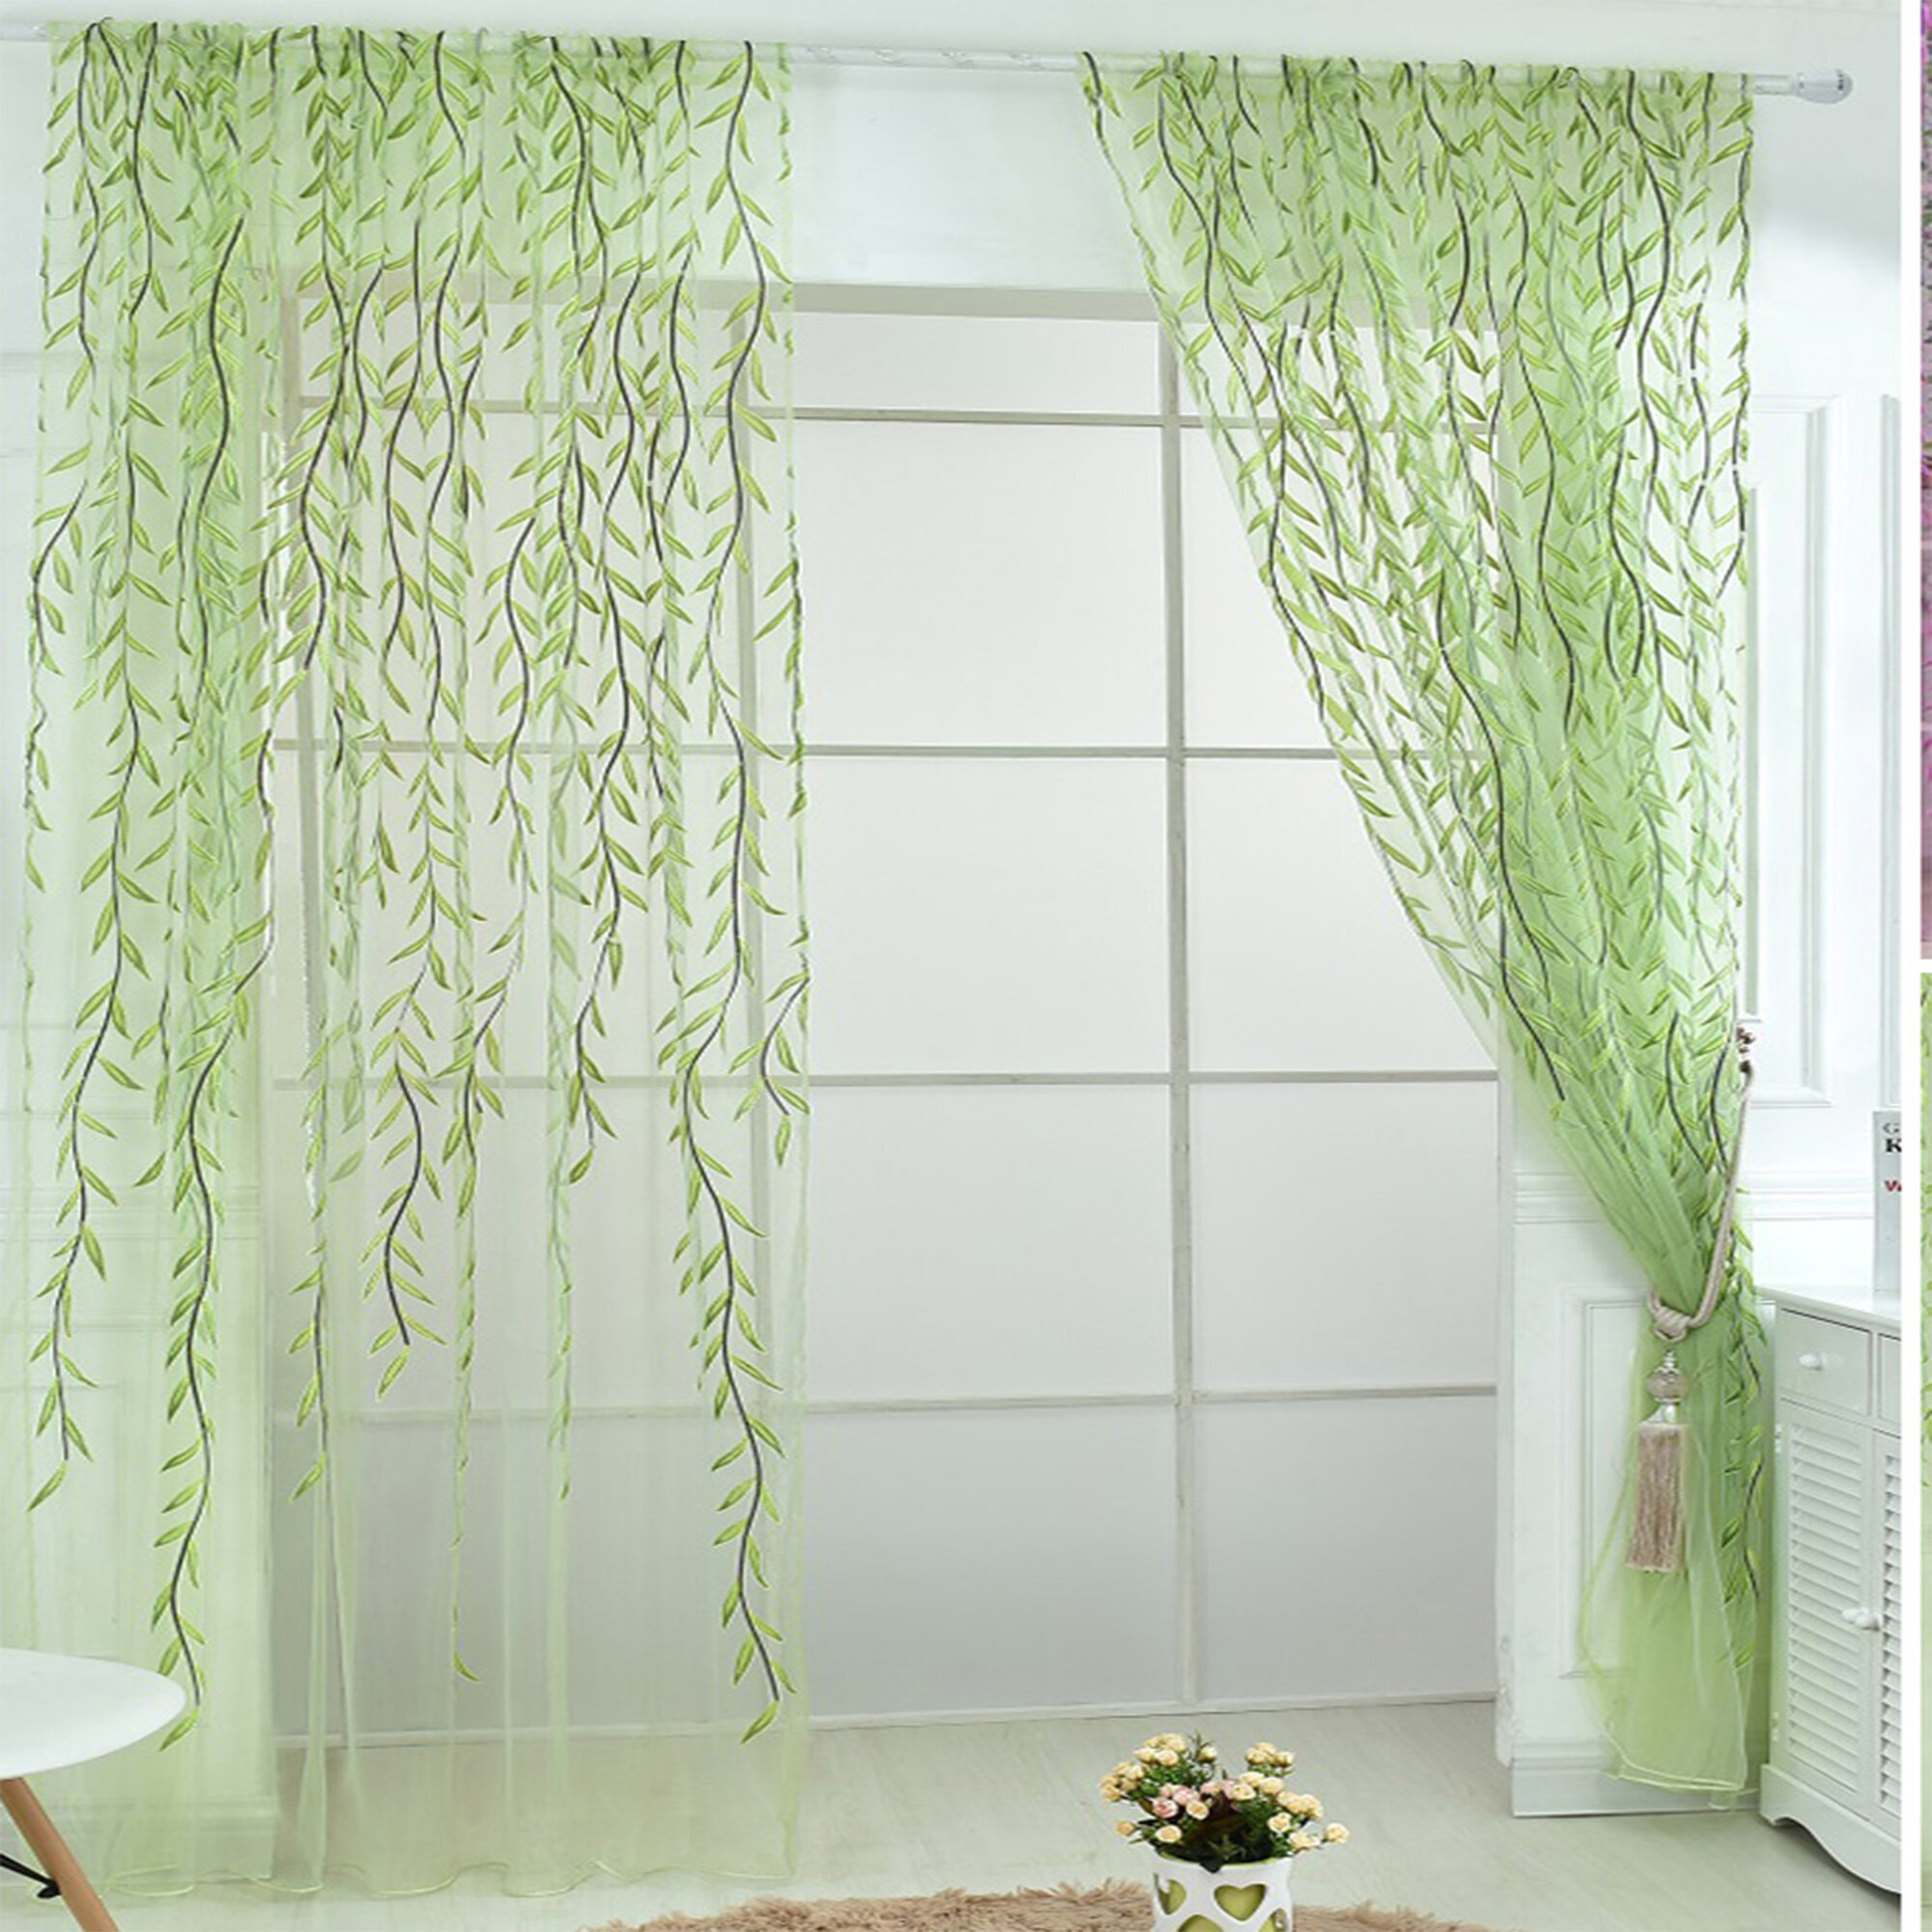 7 Colors Tulle Sheer Voile Window Curtain Drapes Home Hotel Bedroom Decoration 